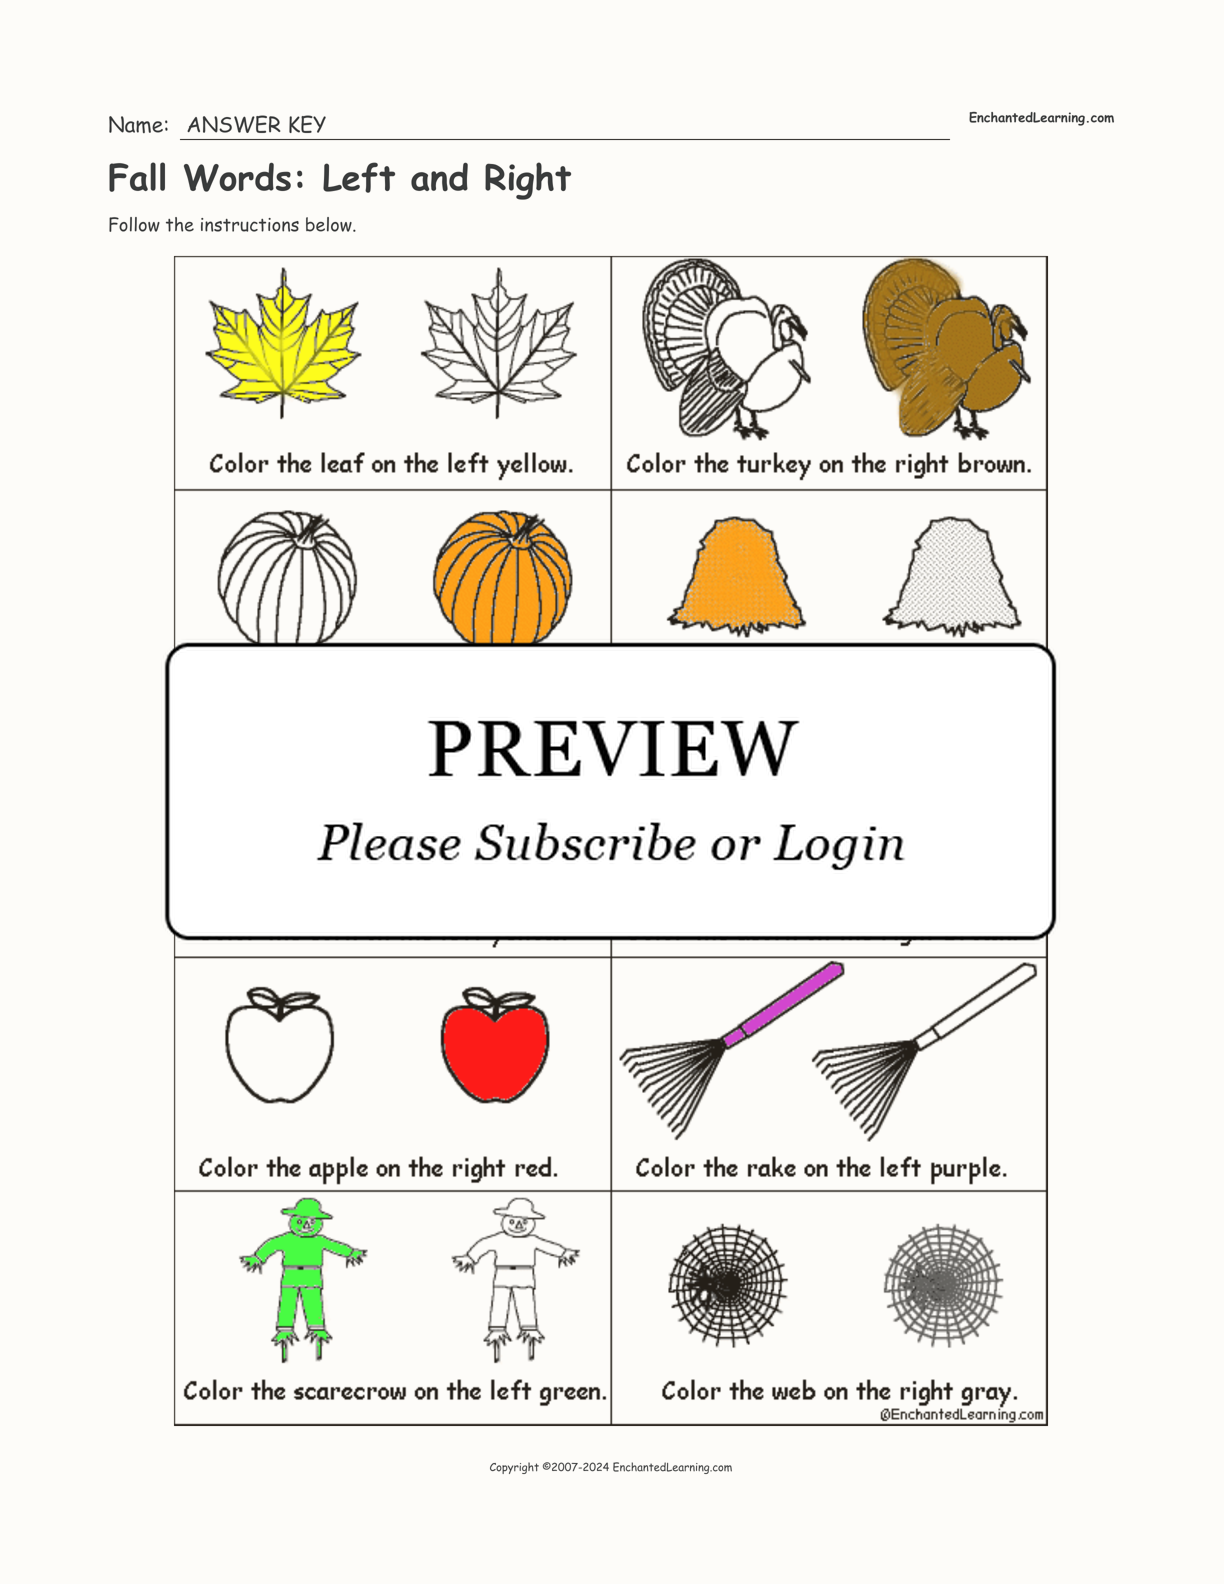 Fall Words: Left and Right interactive worksheet page 2